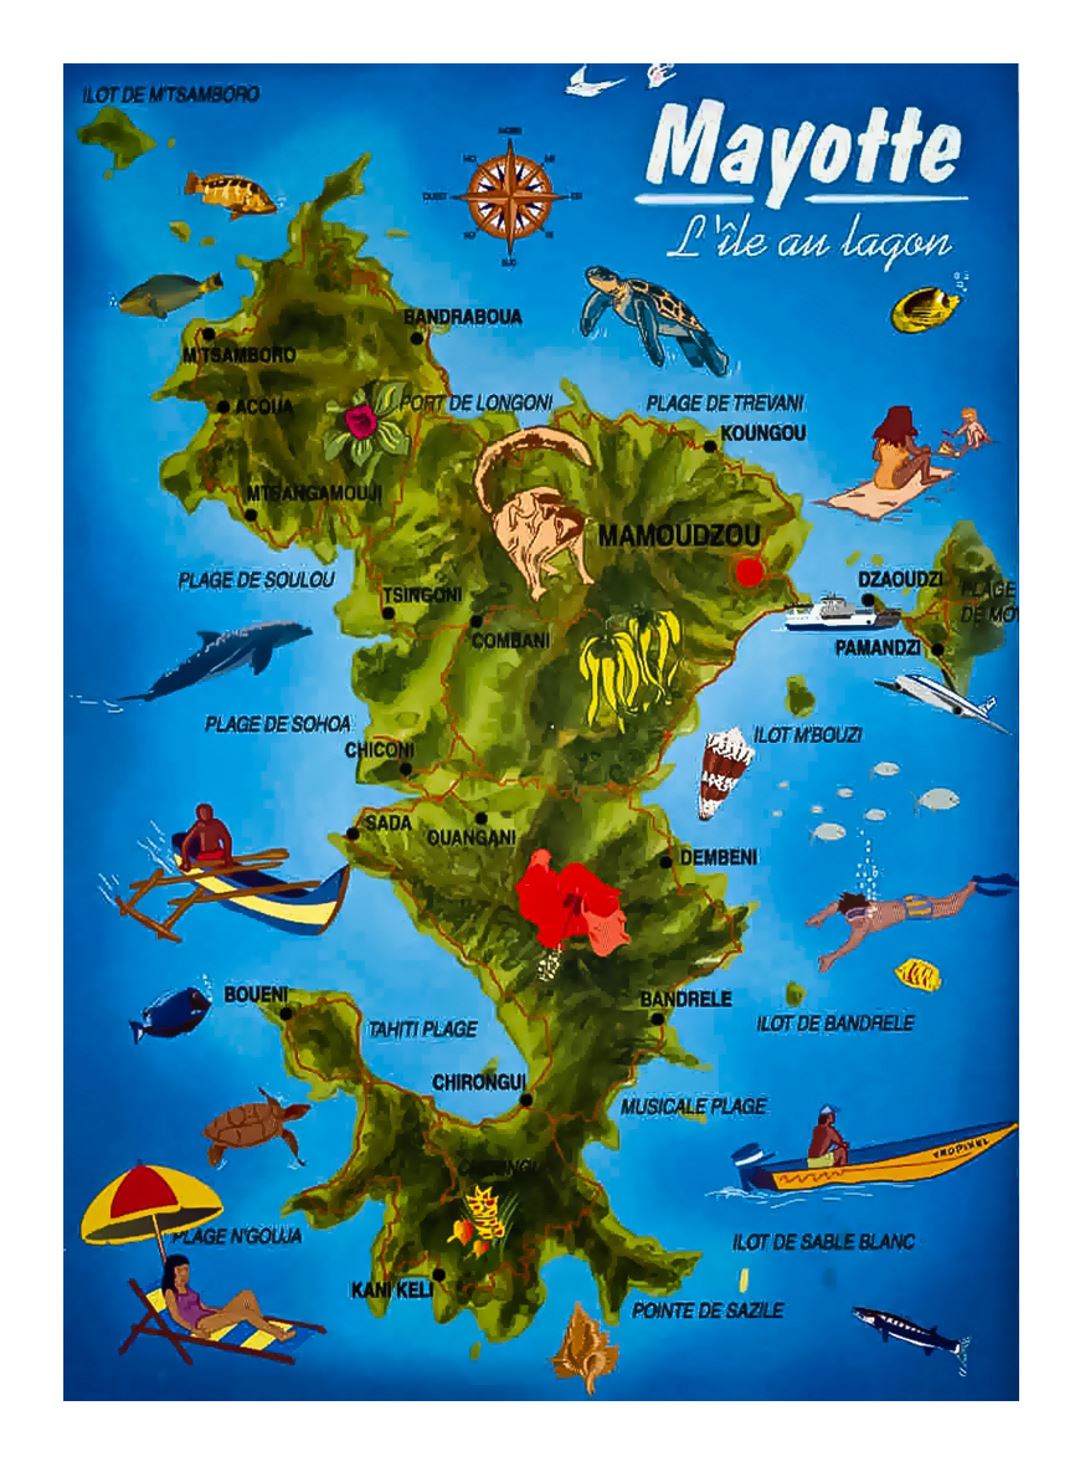 Detailed tourist map of Mayotte Island